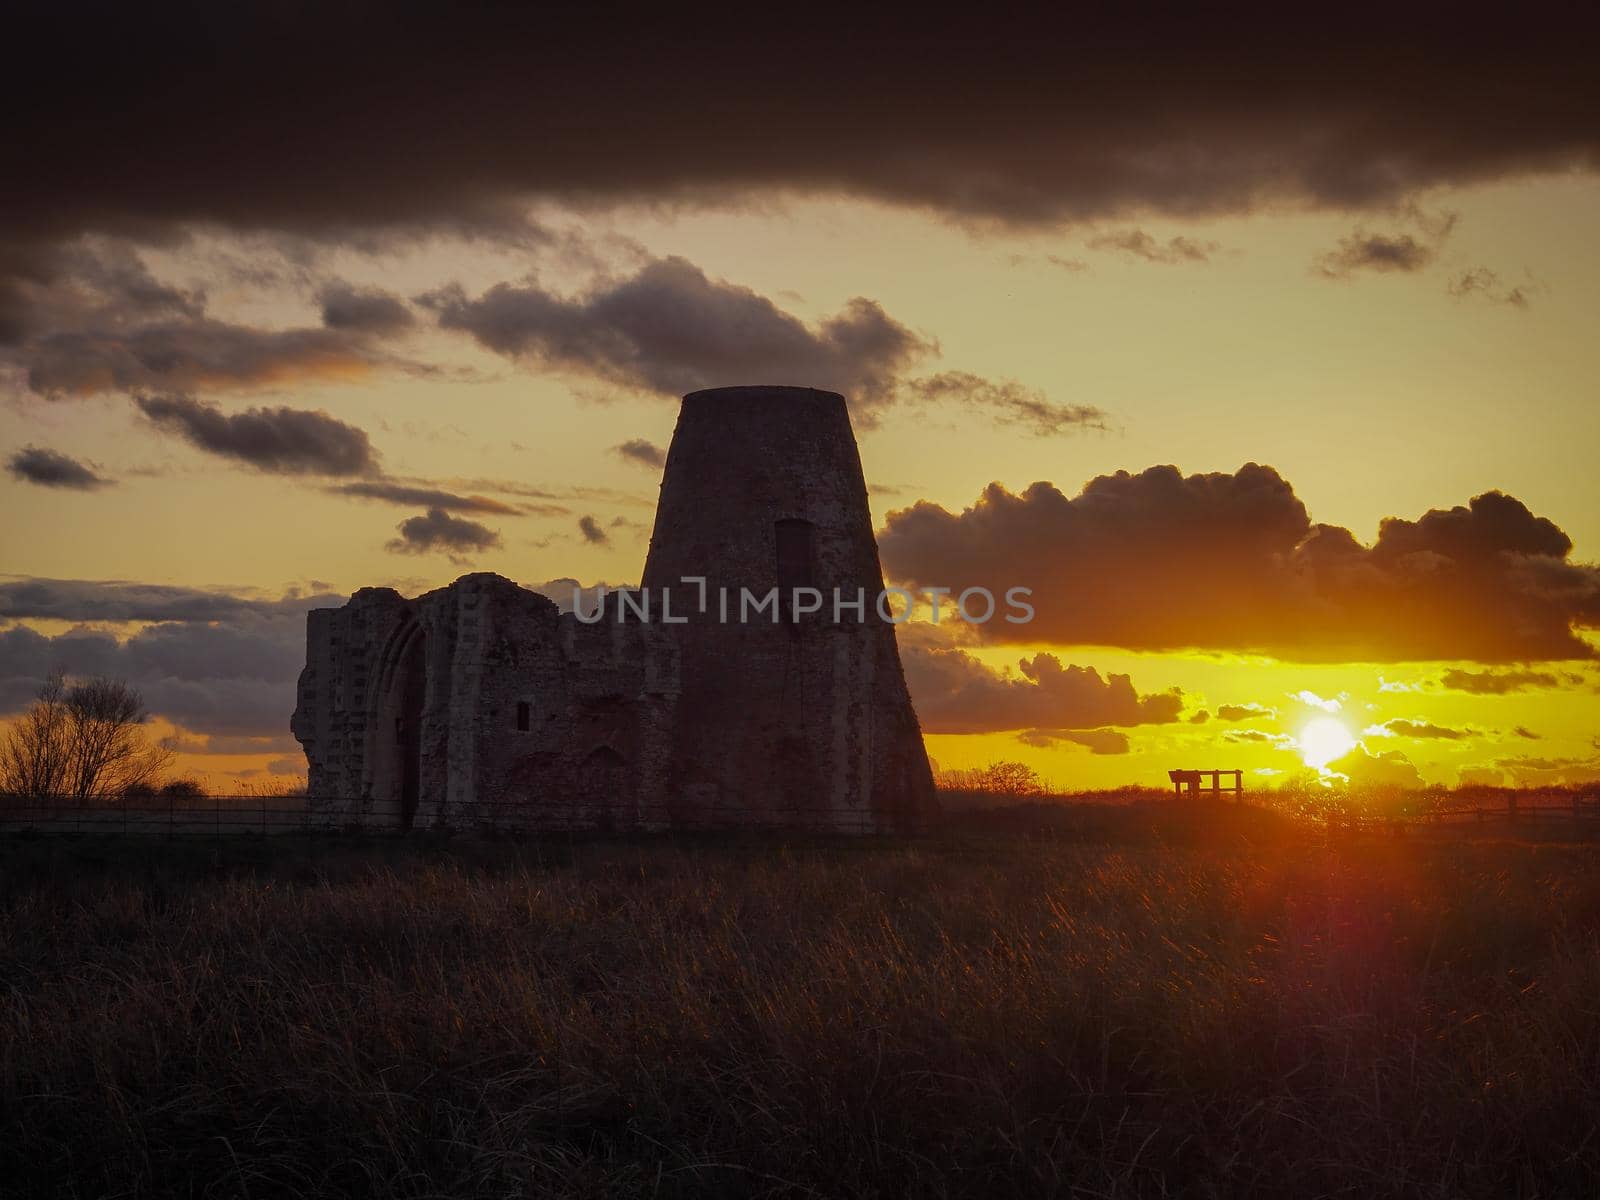 Beautiful orange sunset lighting up the clouds over the ruins of St. Benet's Abbey, near Great Yarmouth, Norfolk, UK